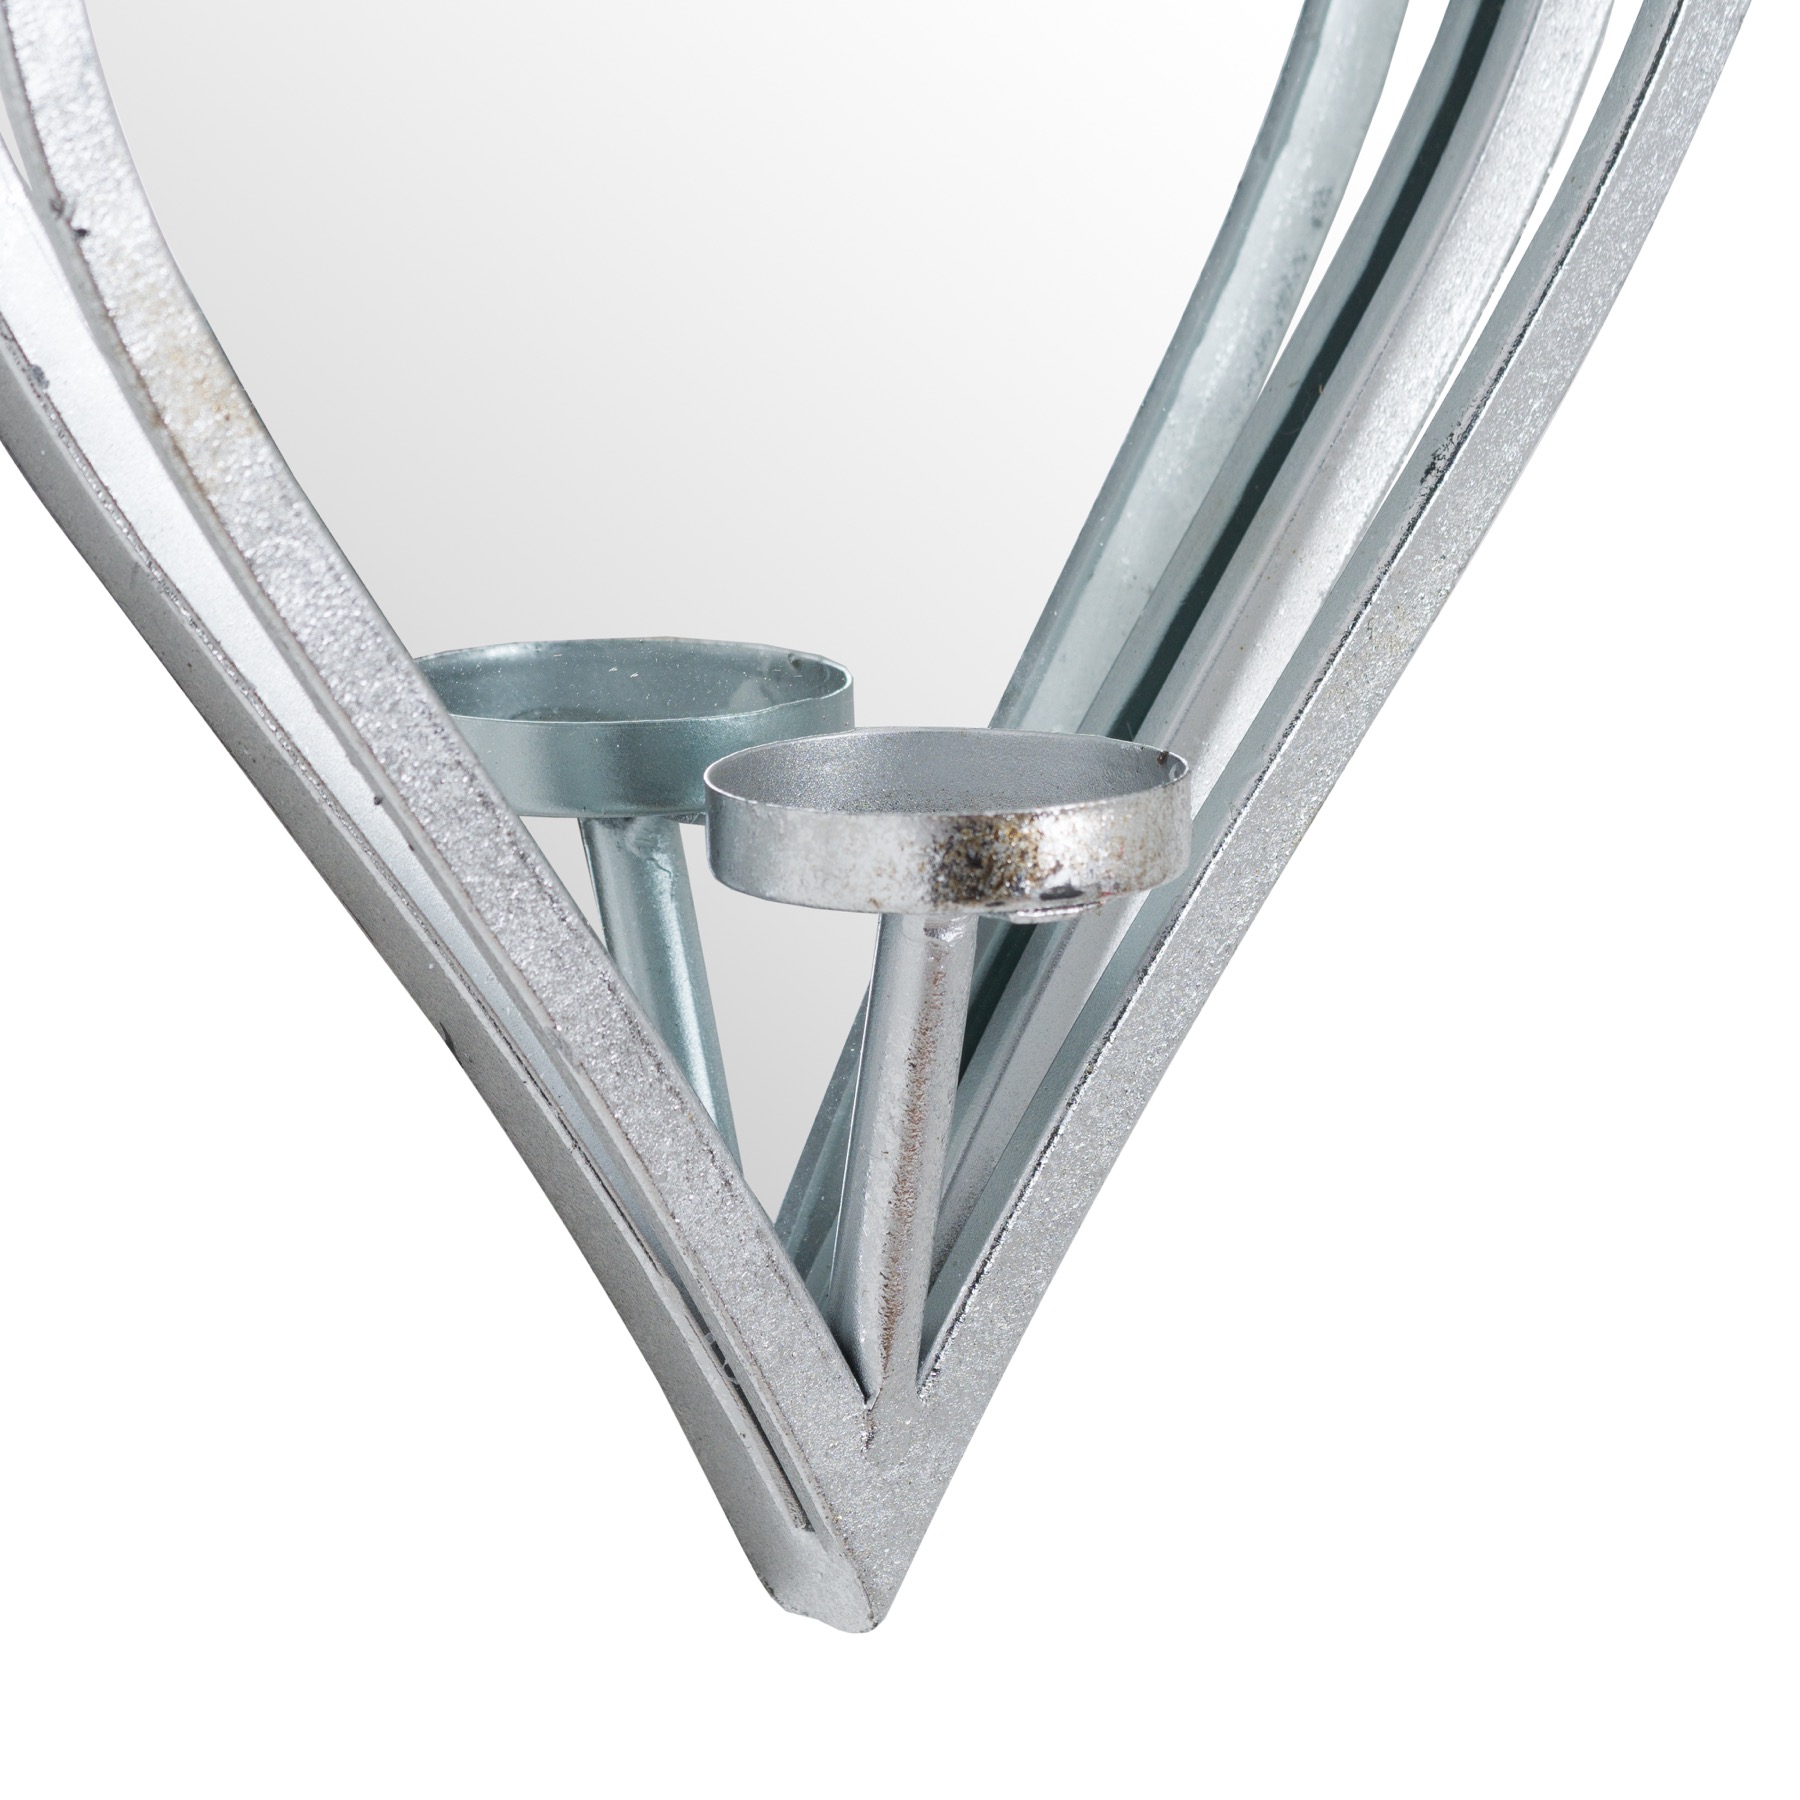 Large Silver Mirrored Heart Candle Holder - Image 2